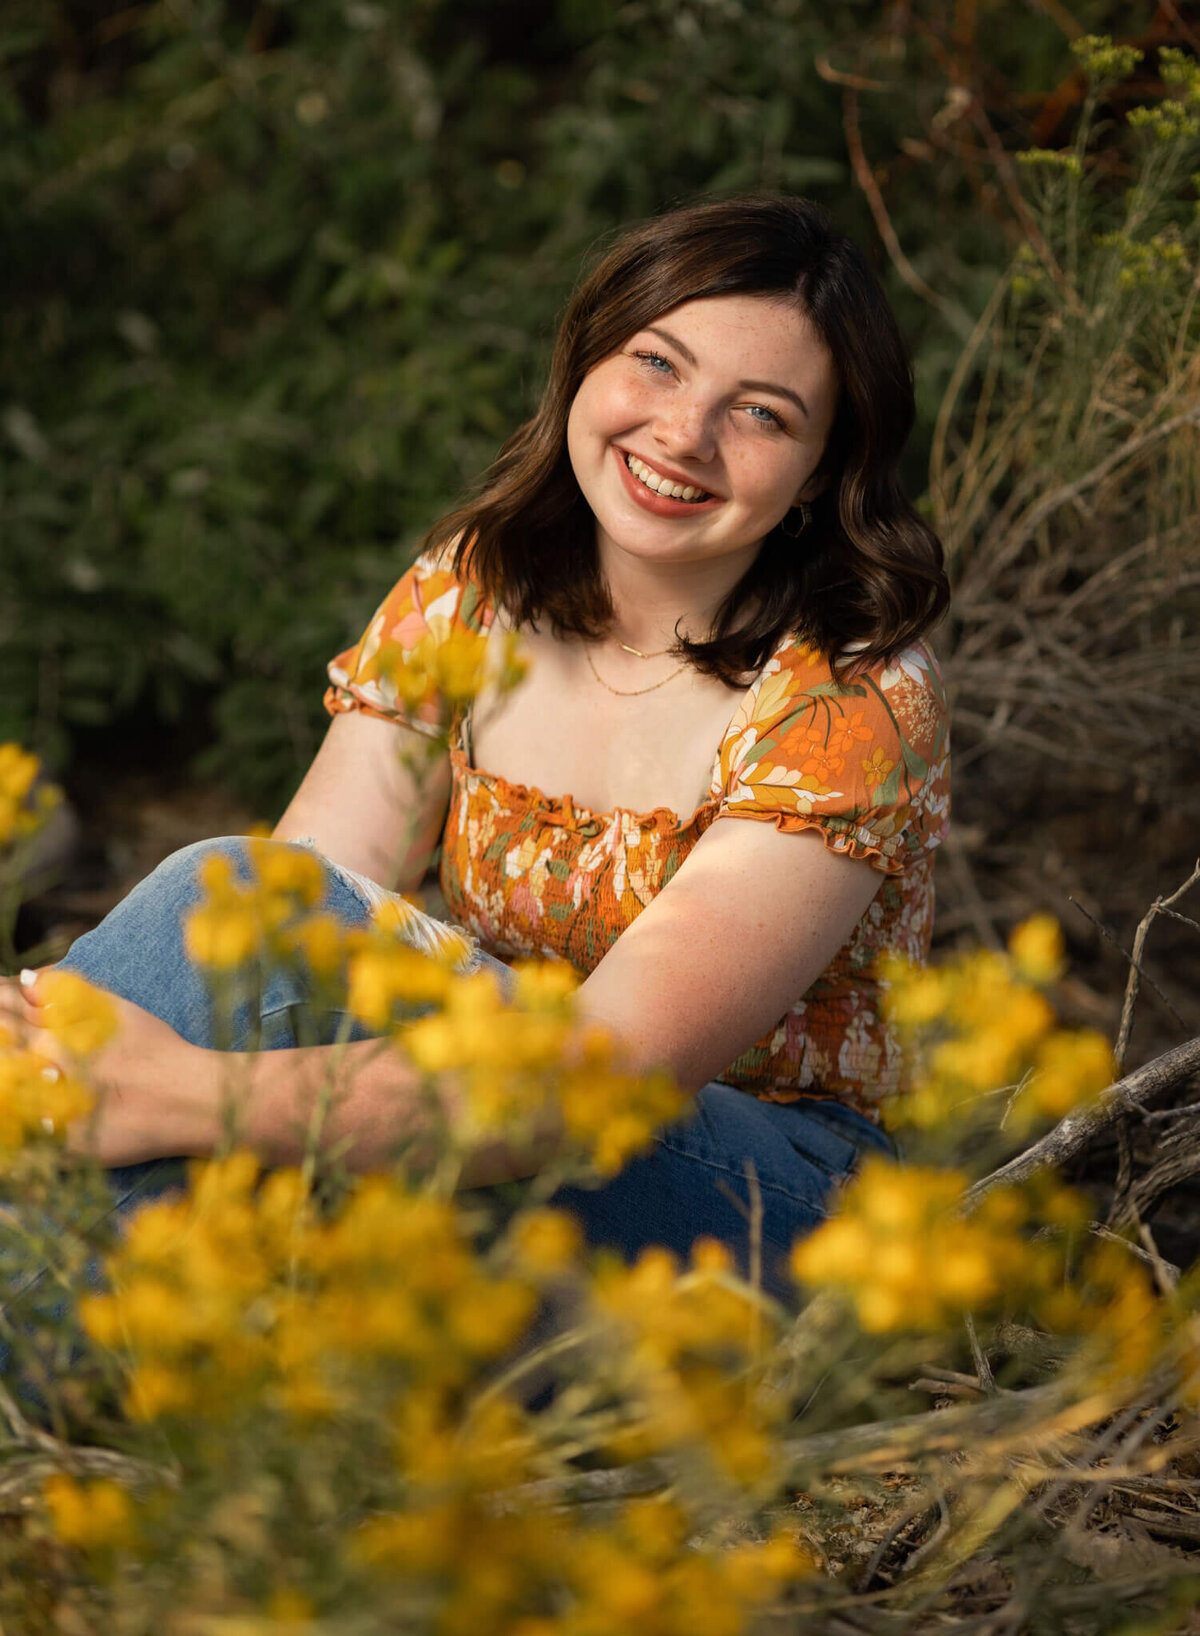 high school senior girl sitting in some grass by small yellow flowers